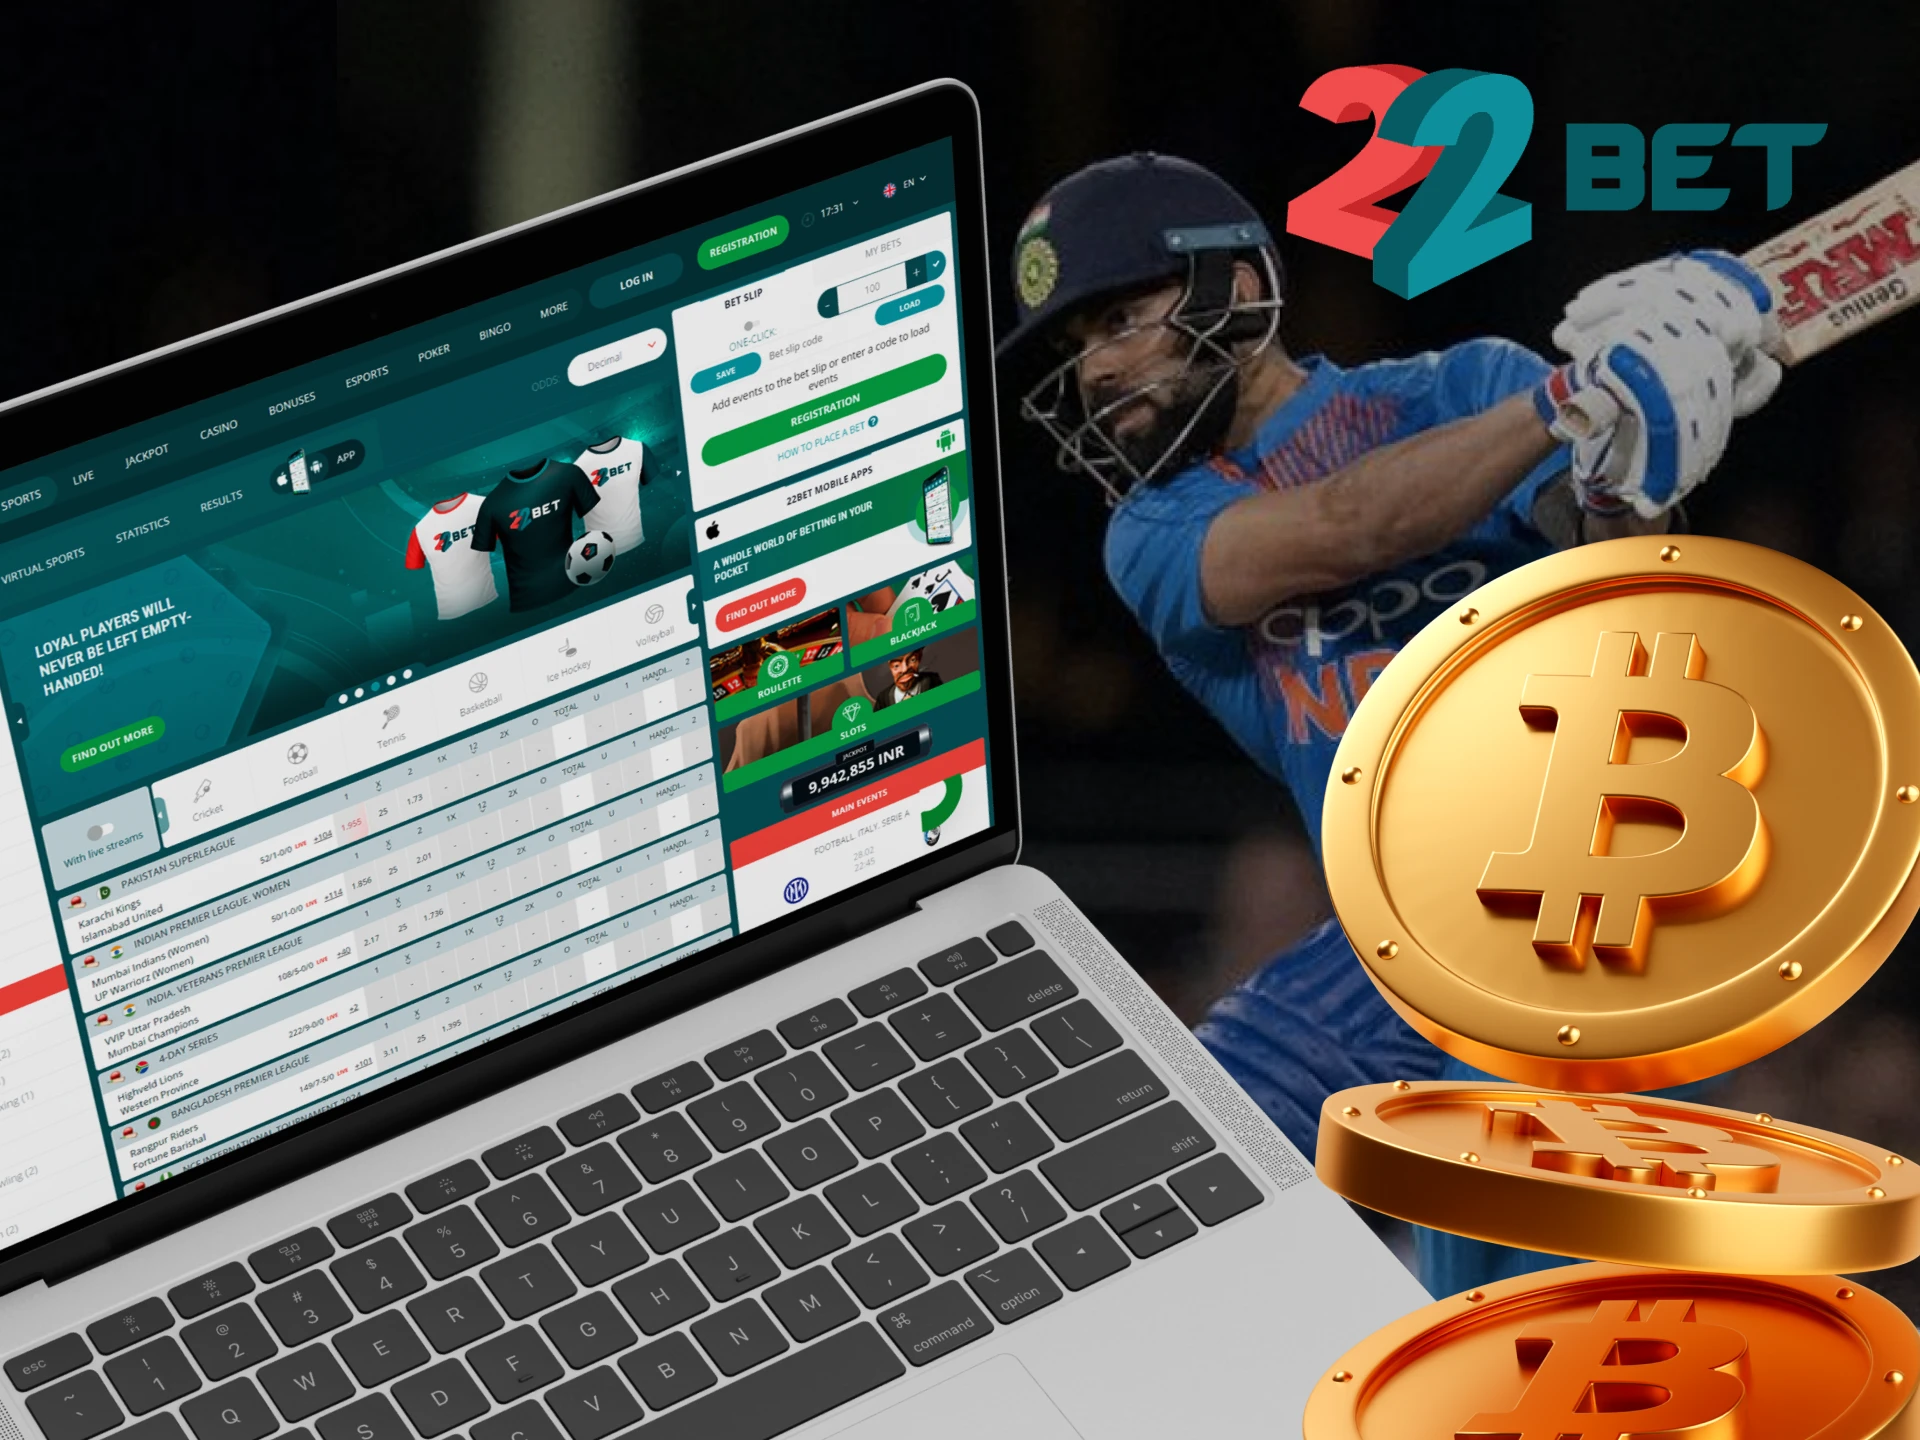 Bet on sports using cryptocurrency at 22bet and win.